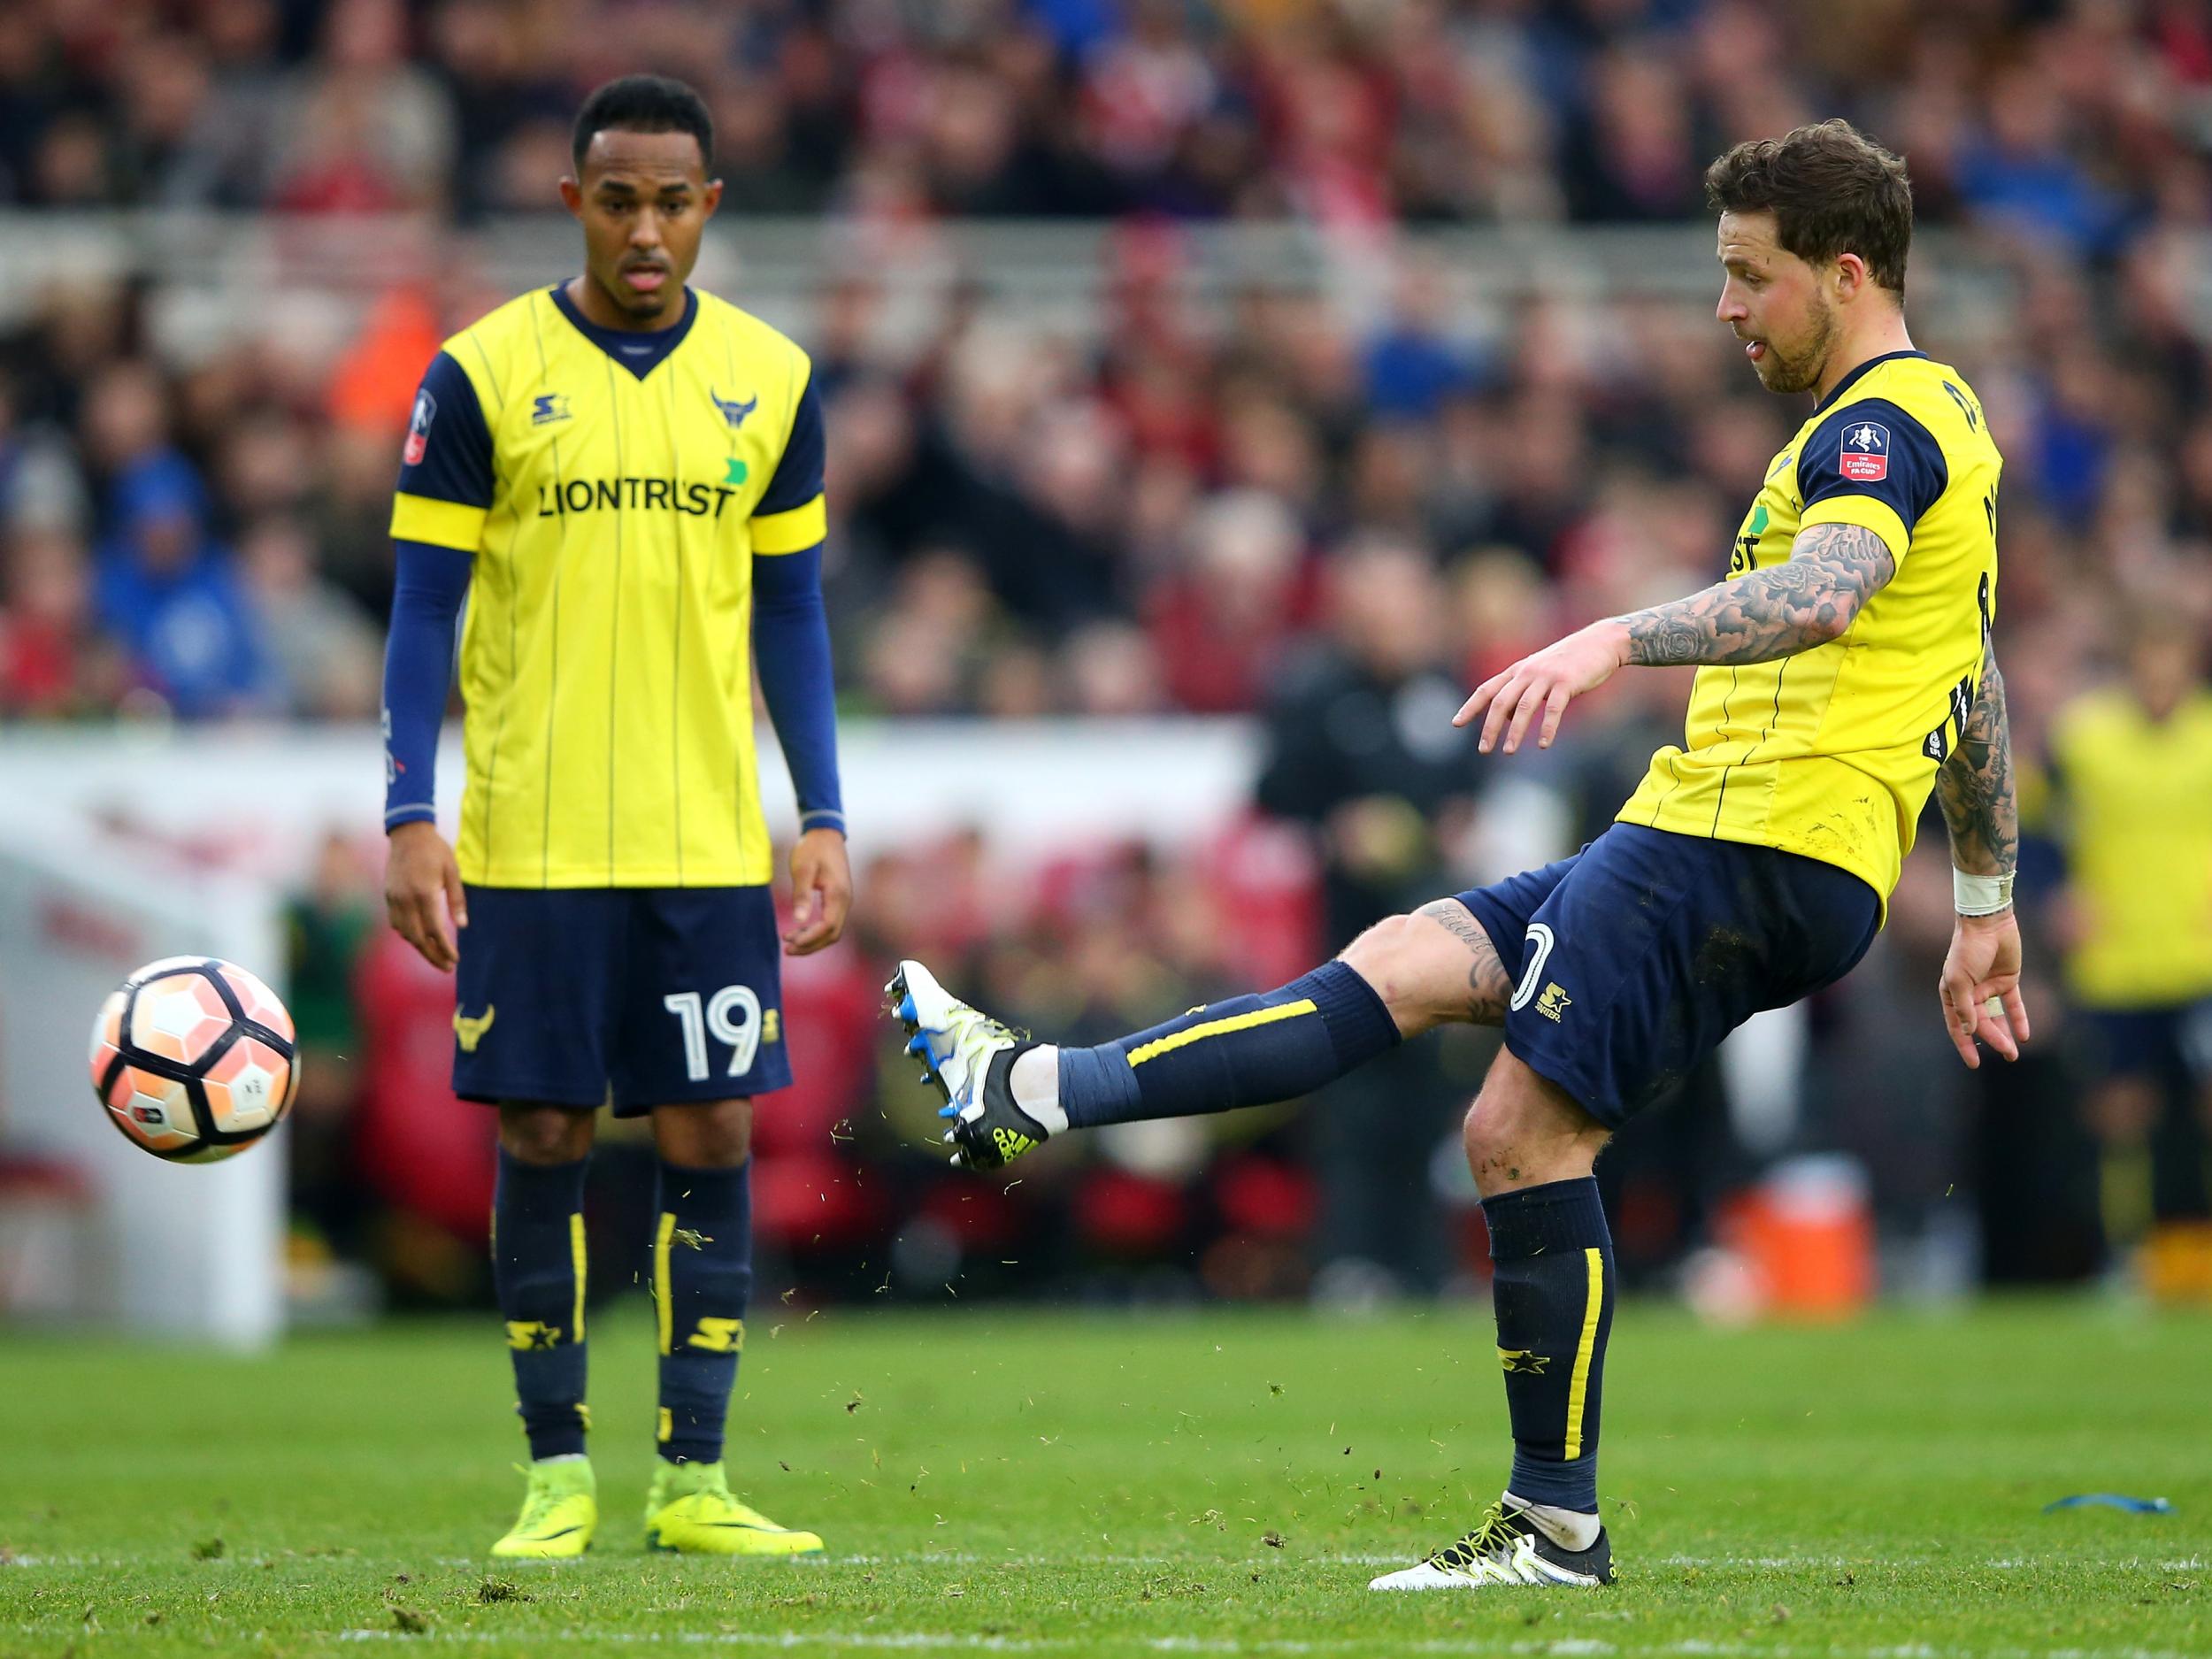 Chris Maguire scored with a superb second-half free-kick